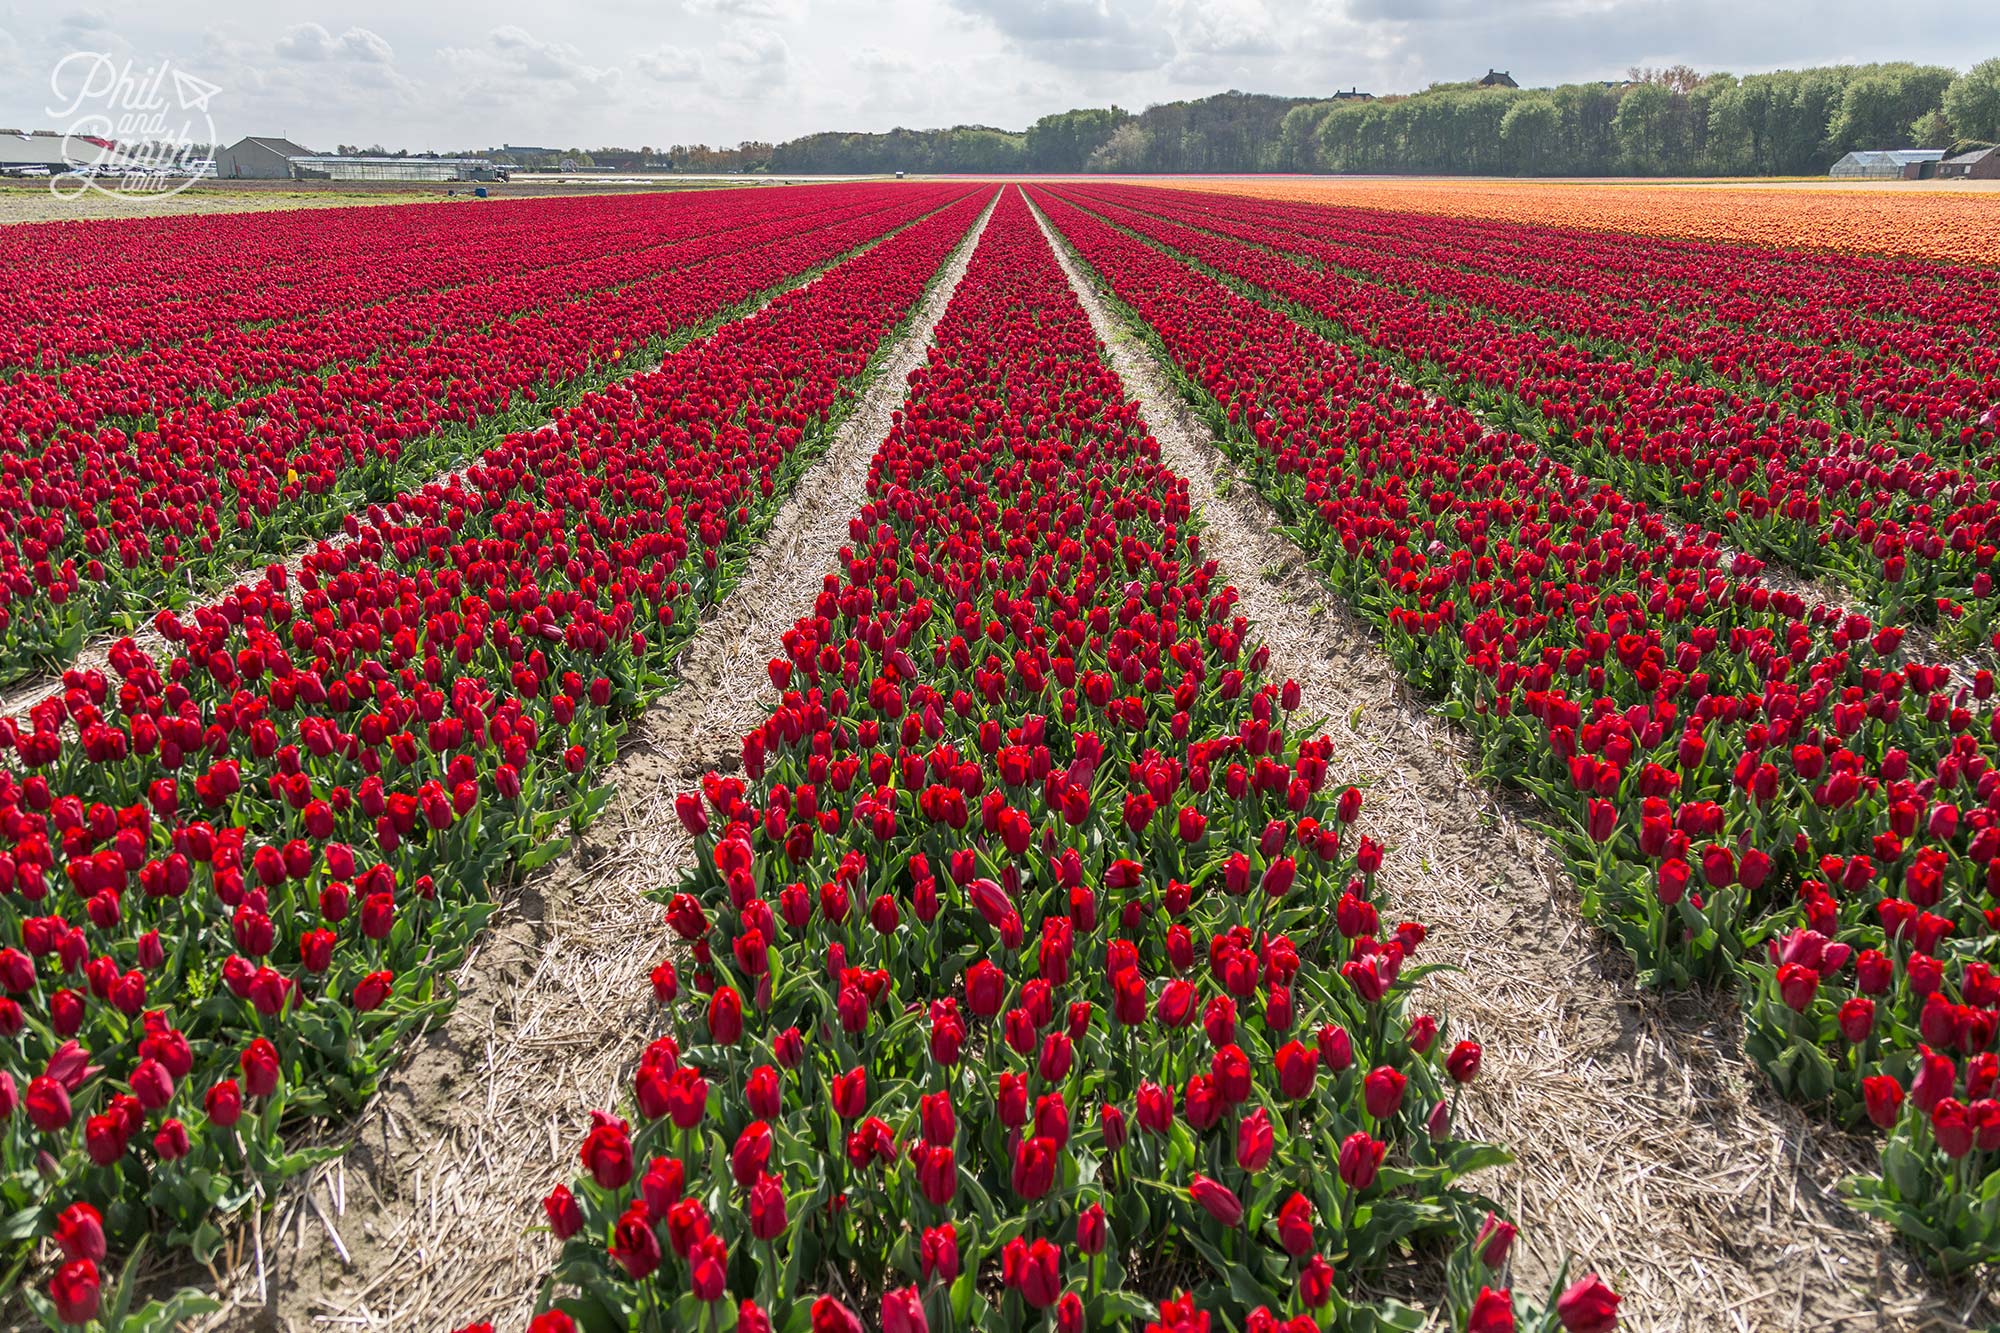 A magnificent view across this field of red tulips